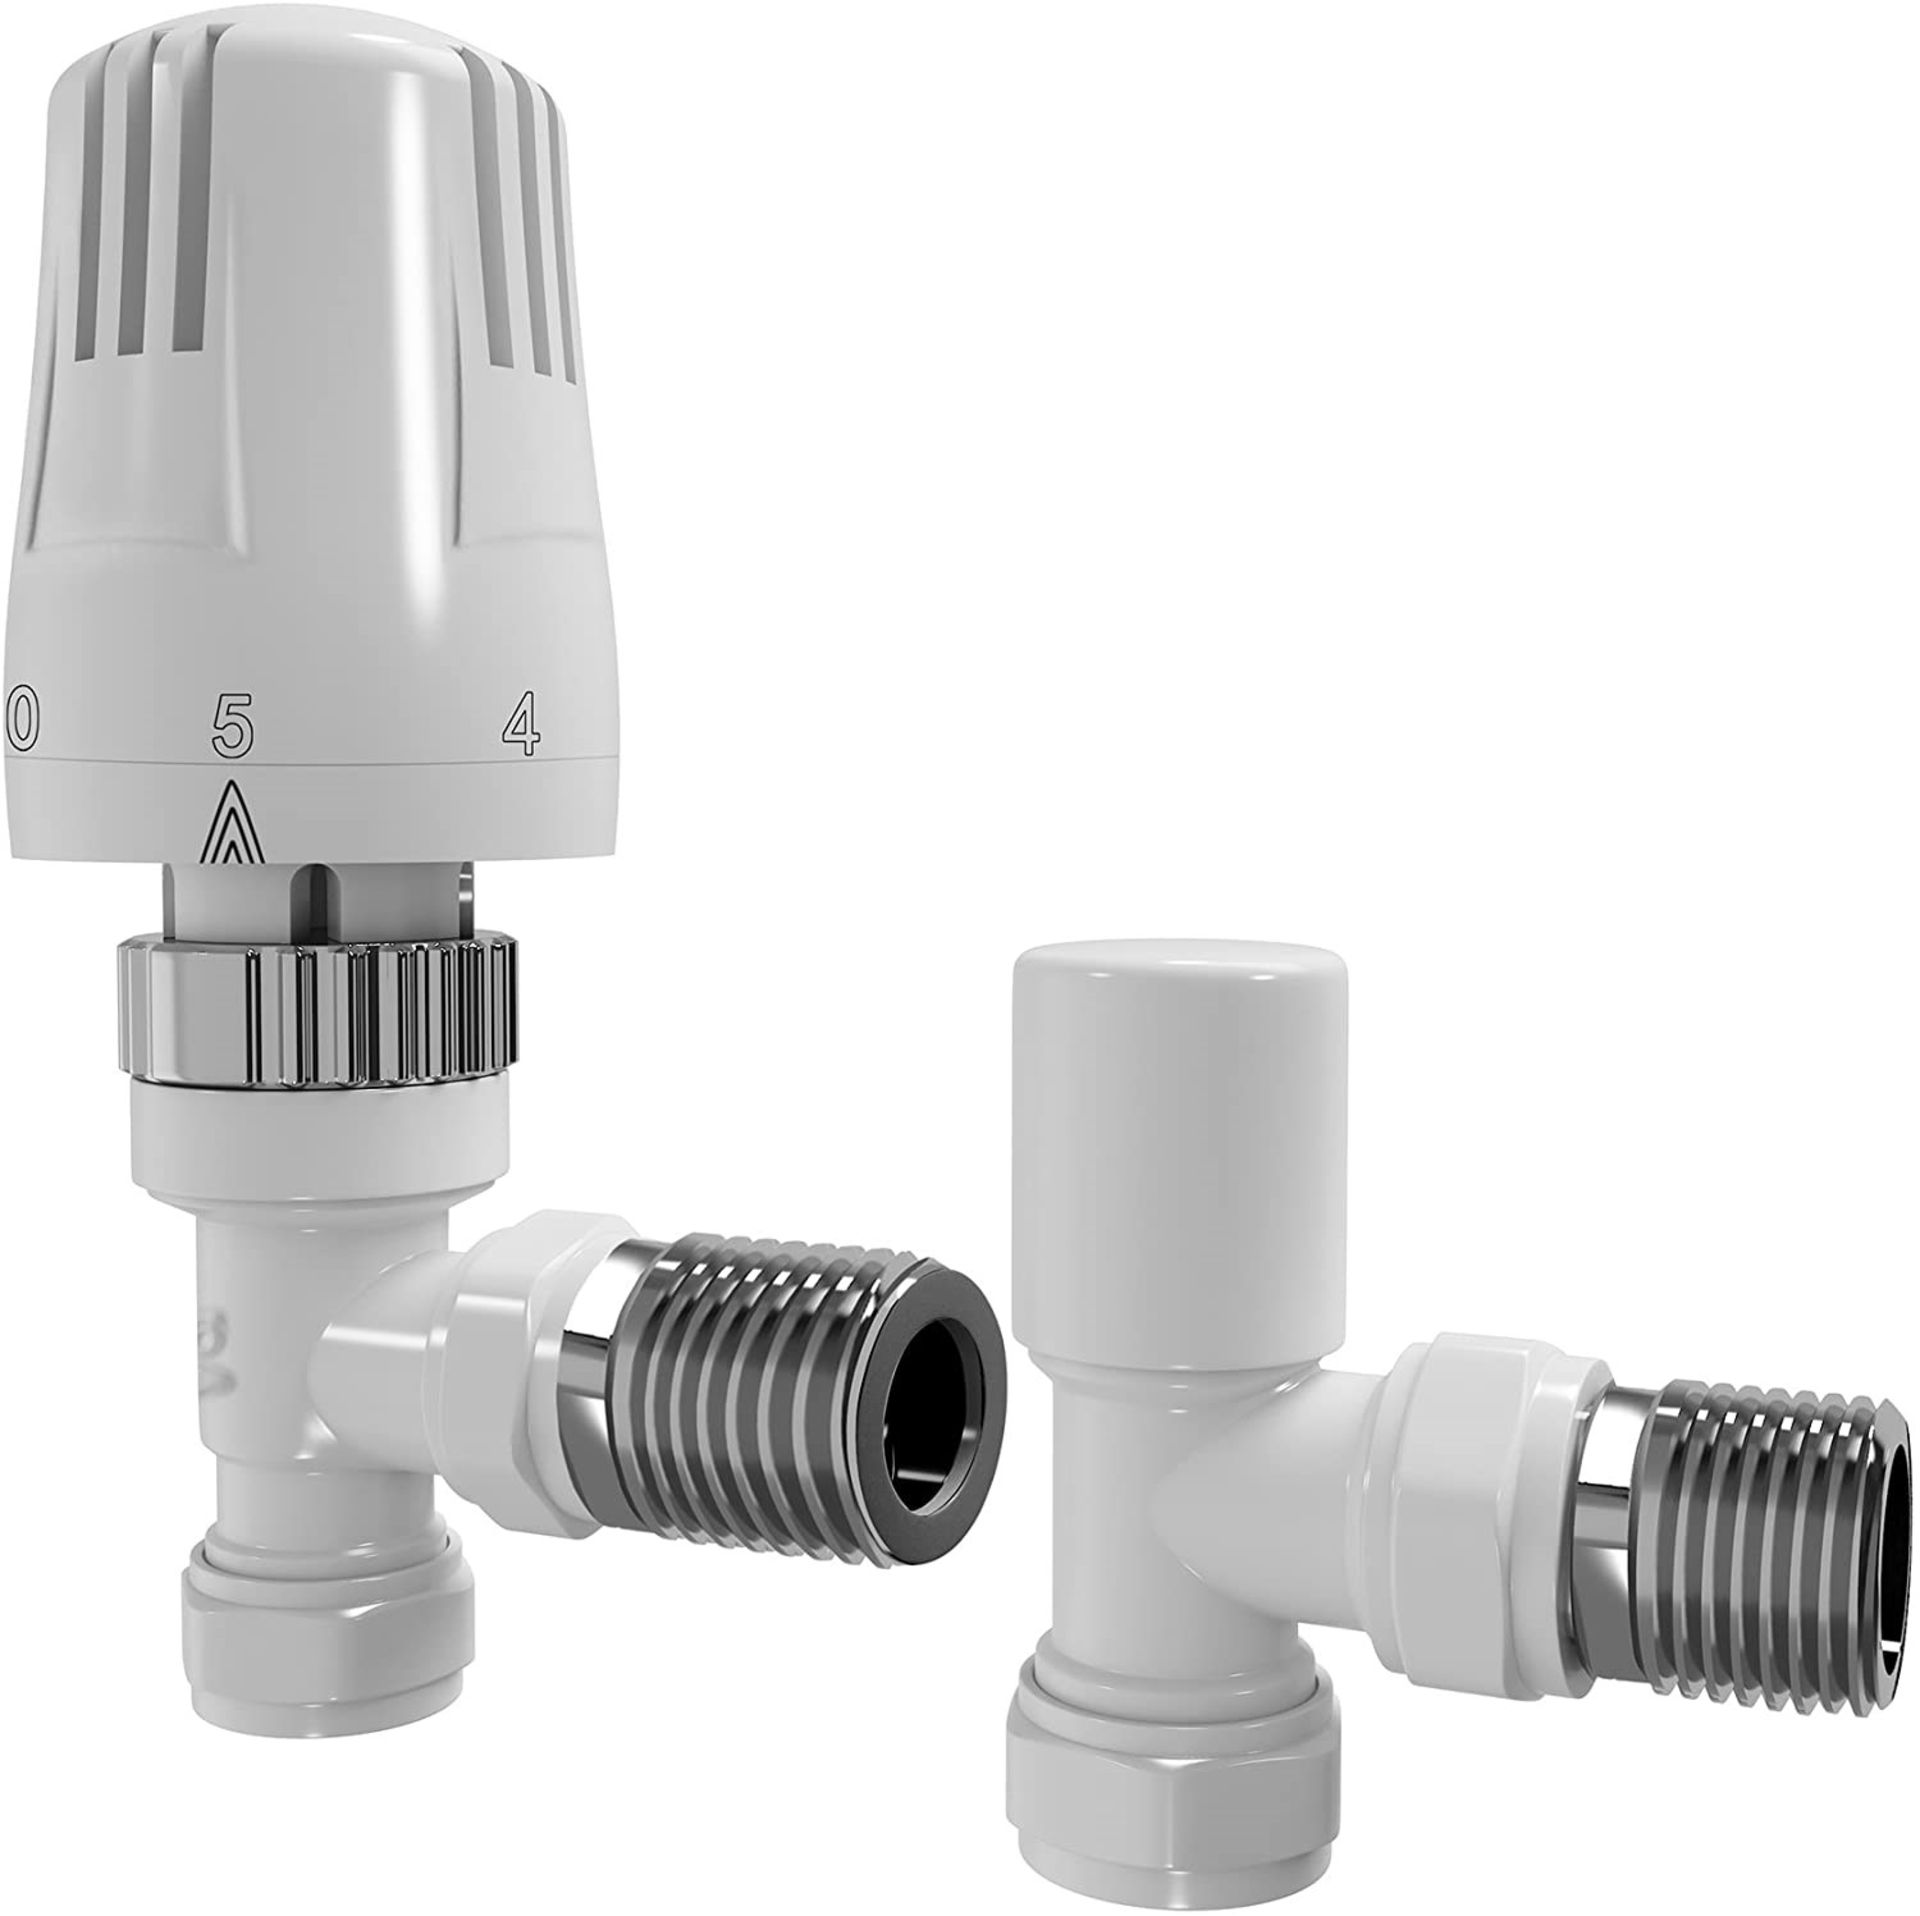 White Thermostatic Angled Radiator Valves. RA32A. Solid brass core with gloss white finish Th...